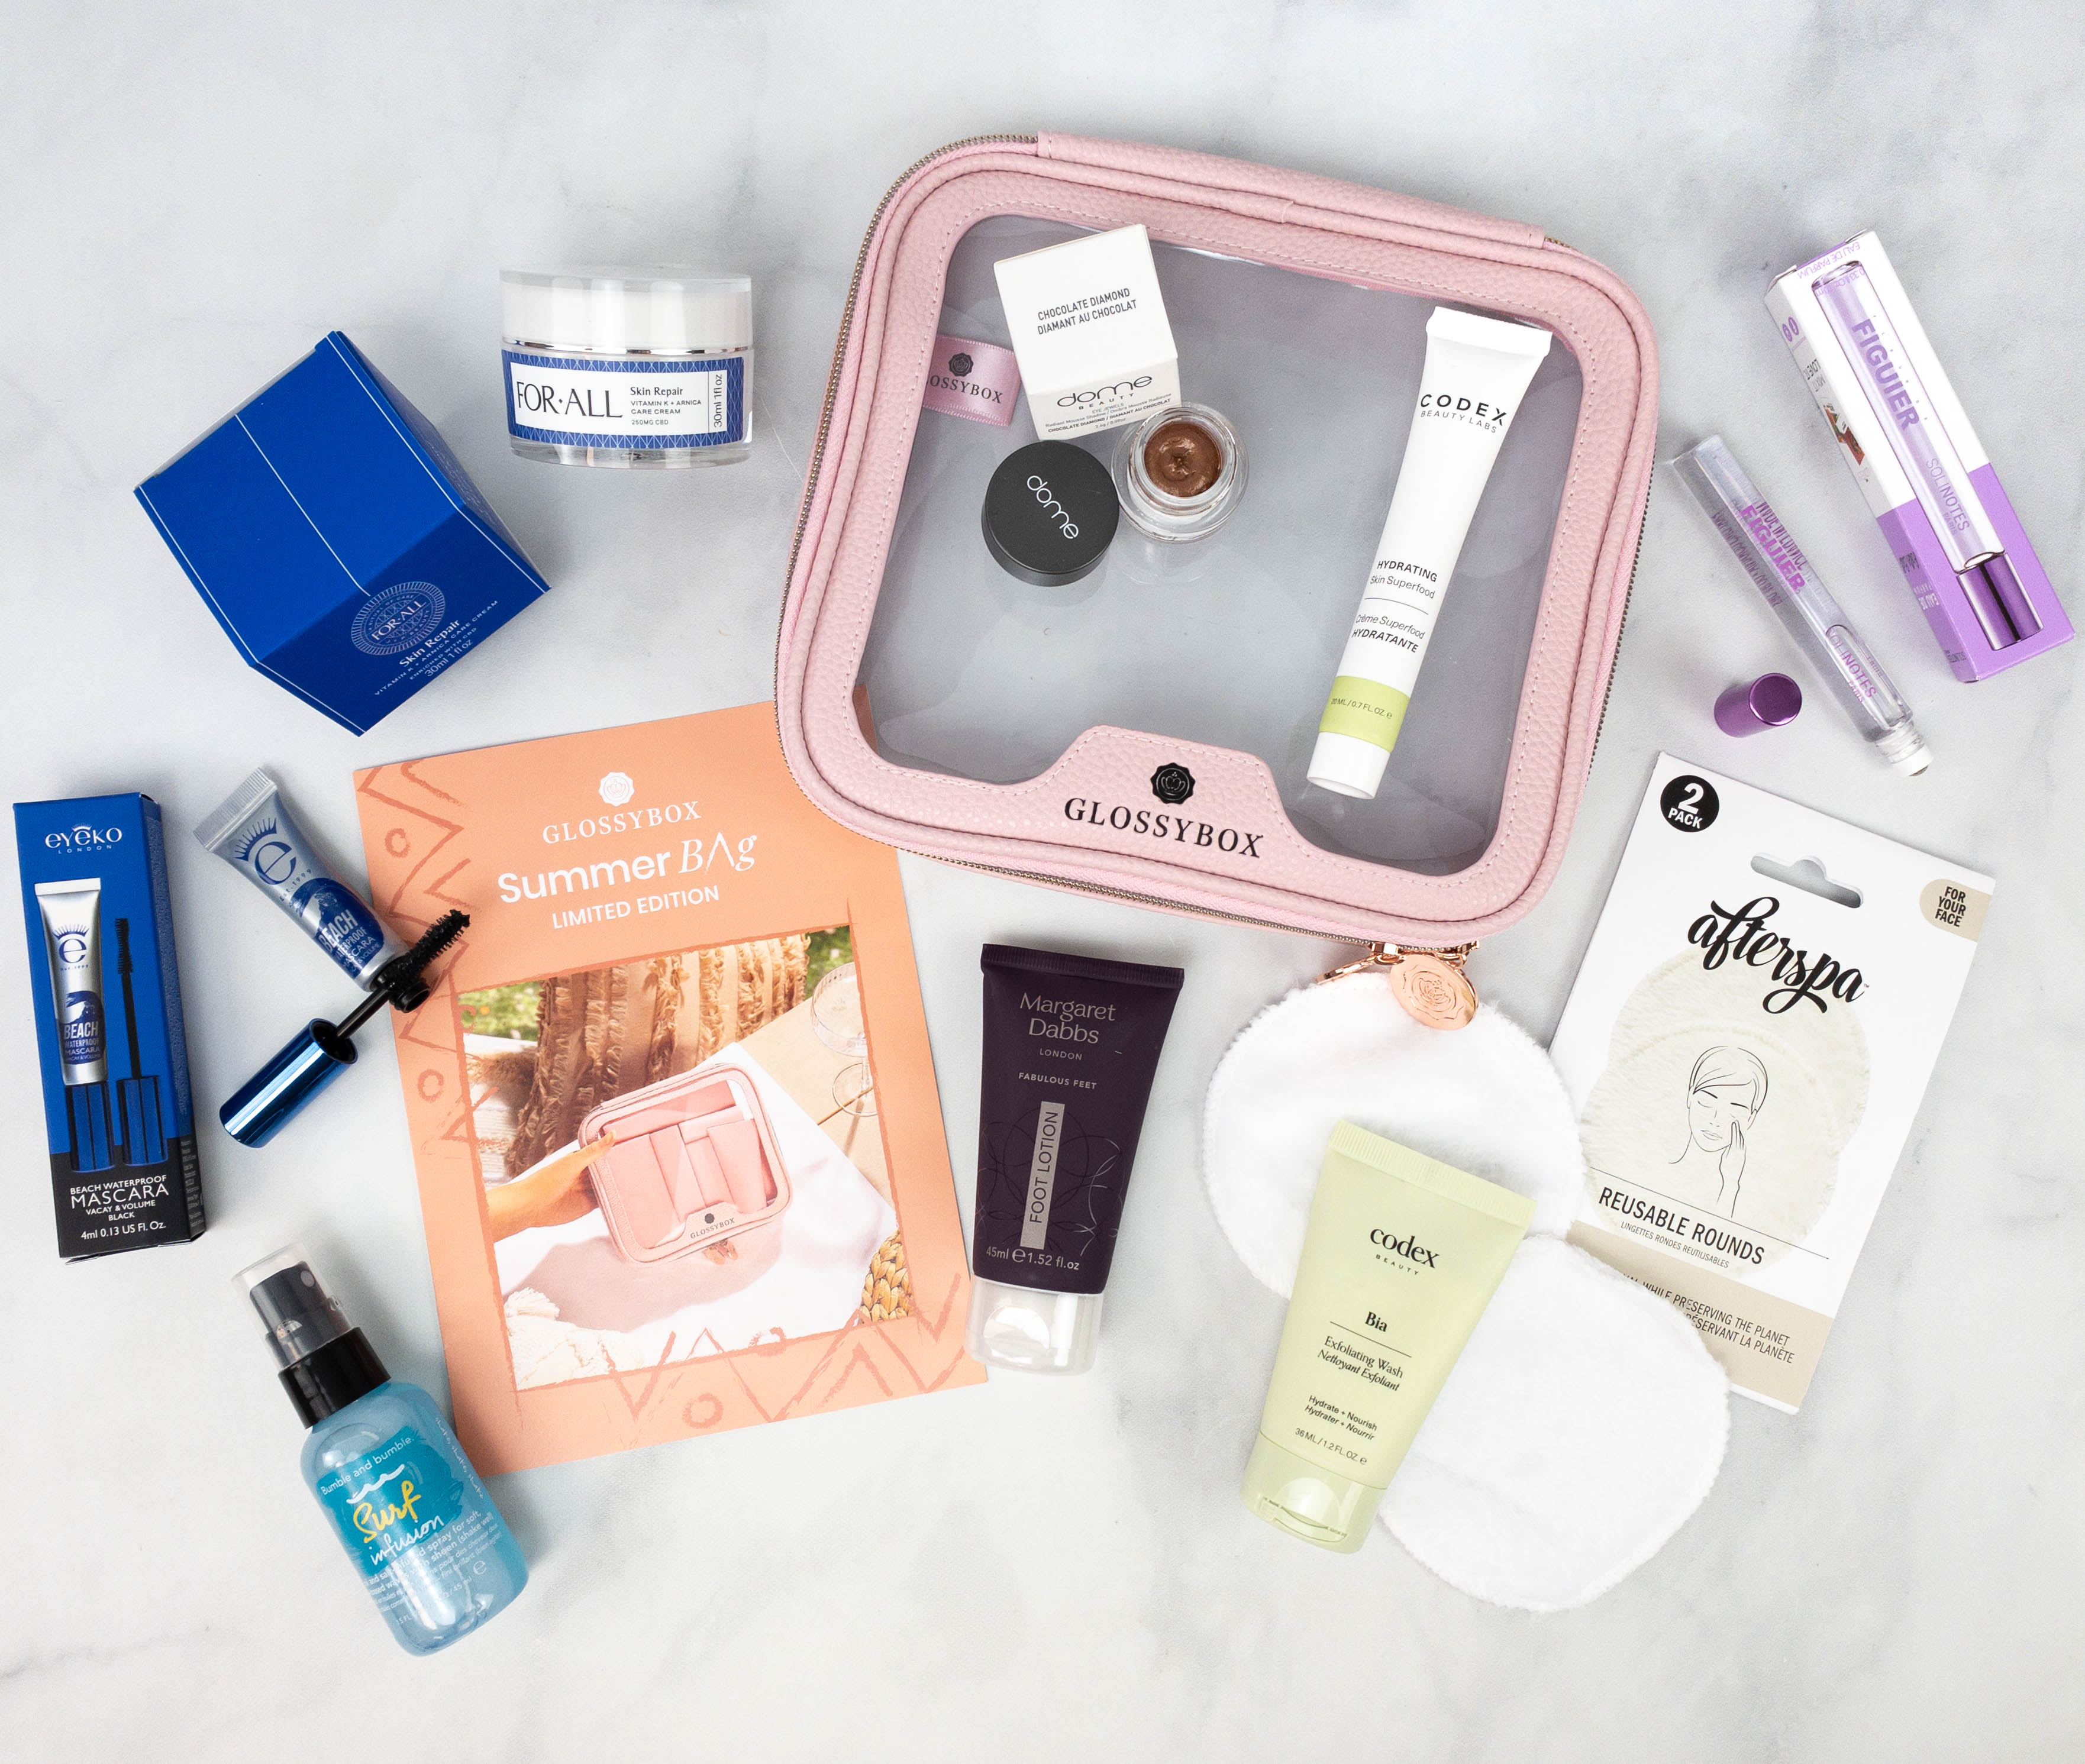 https://hellosubscription.com/wp-content/uploads/2021/06/glossybox-limited-edition-summer-2021-8.jpg?quality=90&strip=all